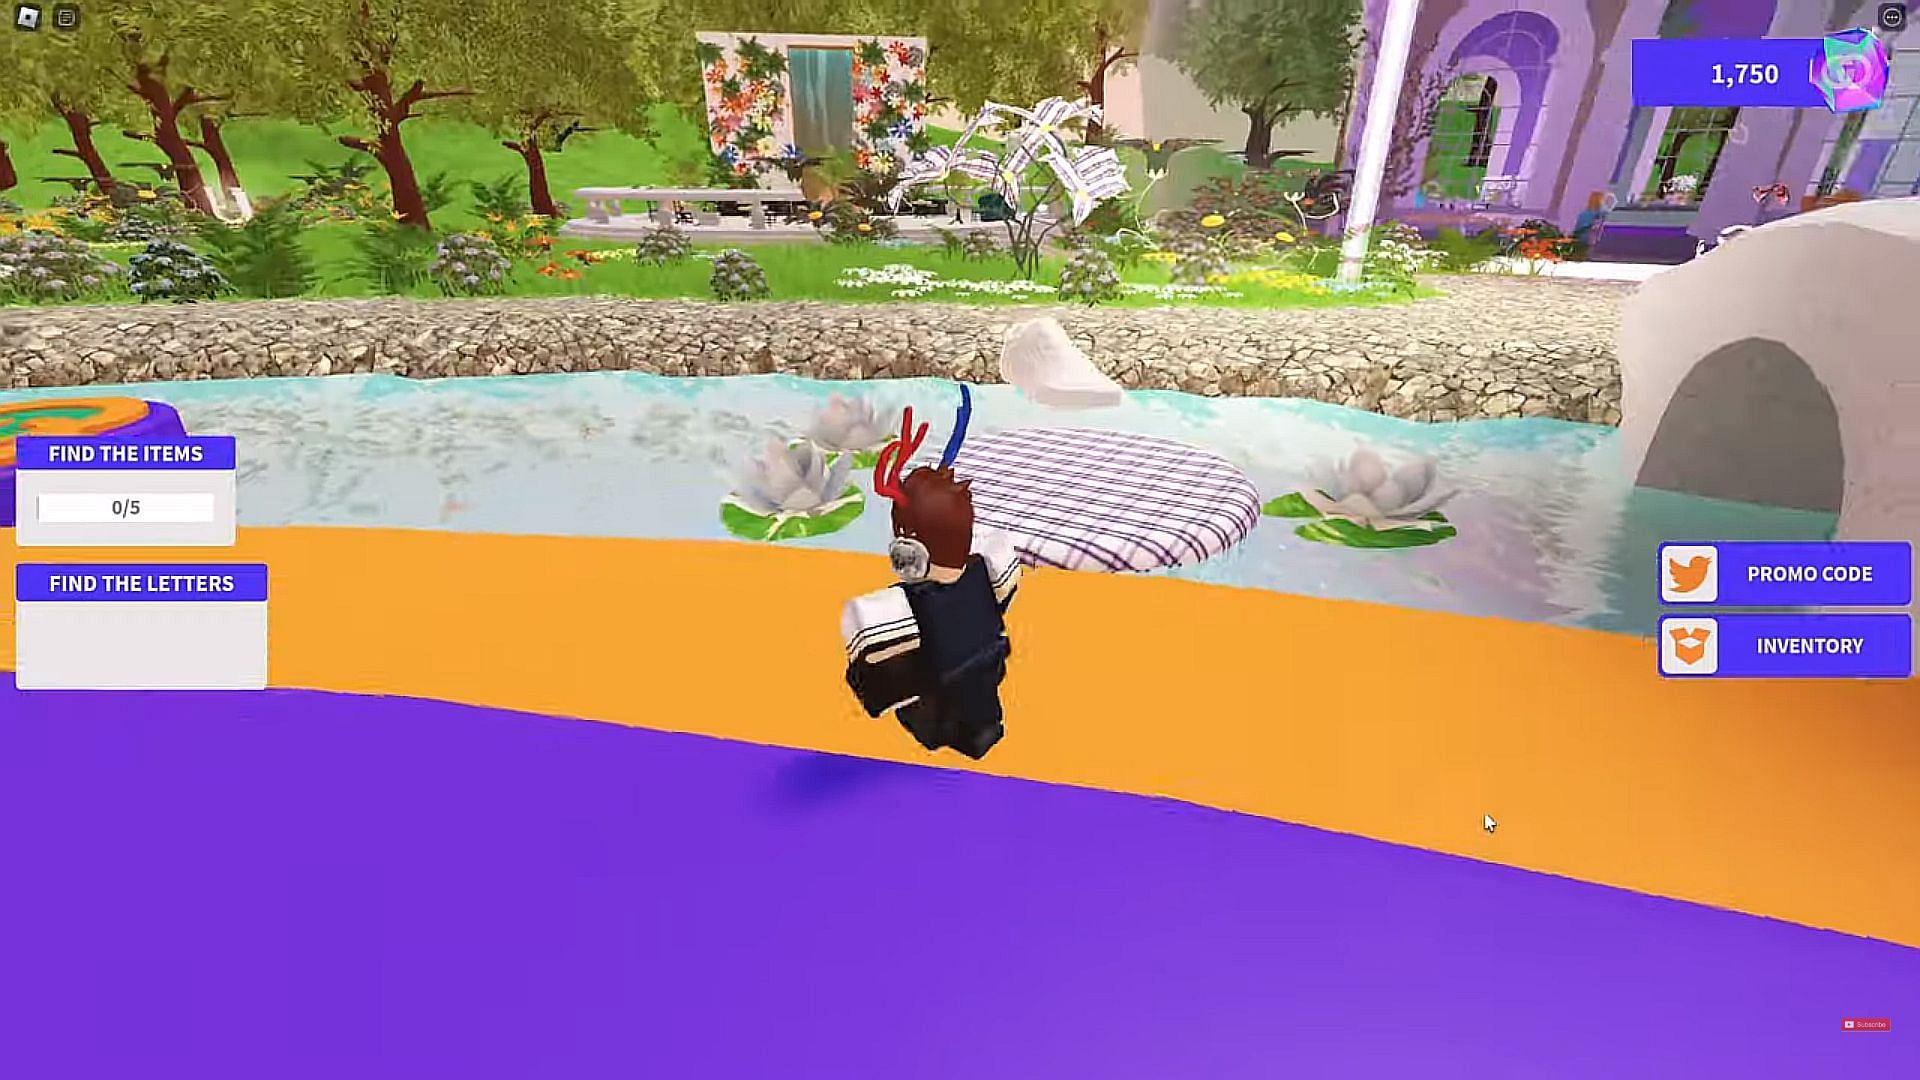 Gucci shoe on a water platform (Image via Conor3D/YouTube)